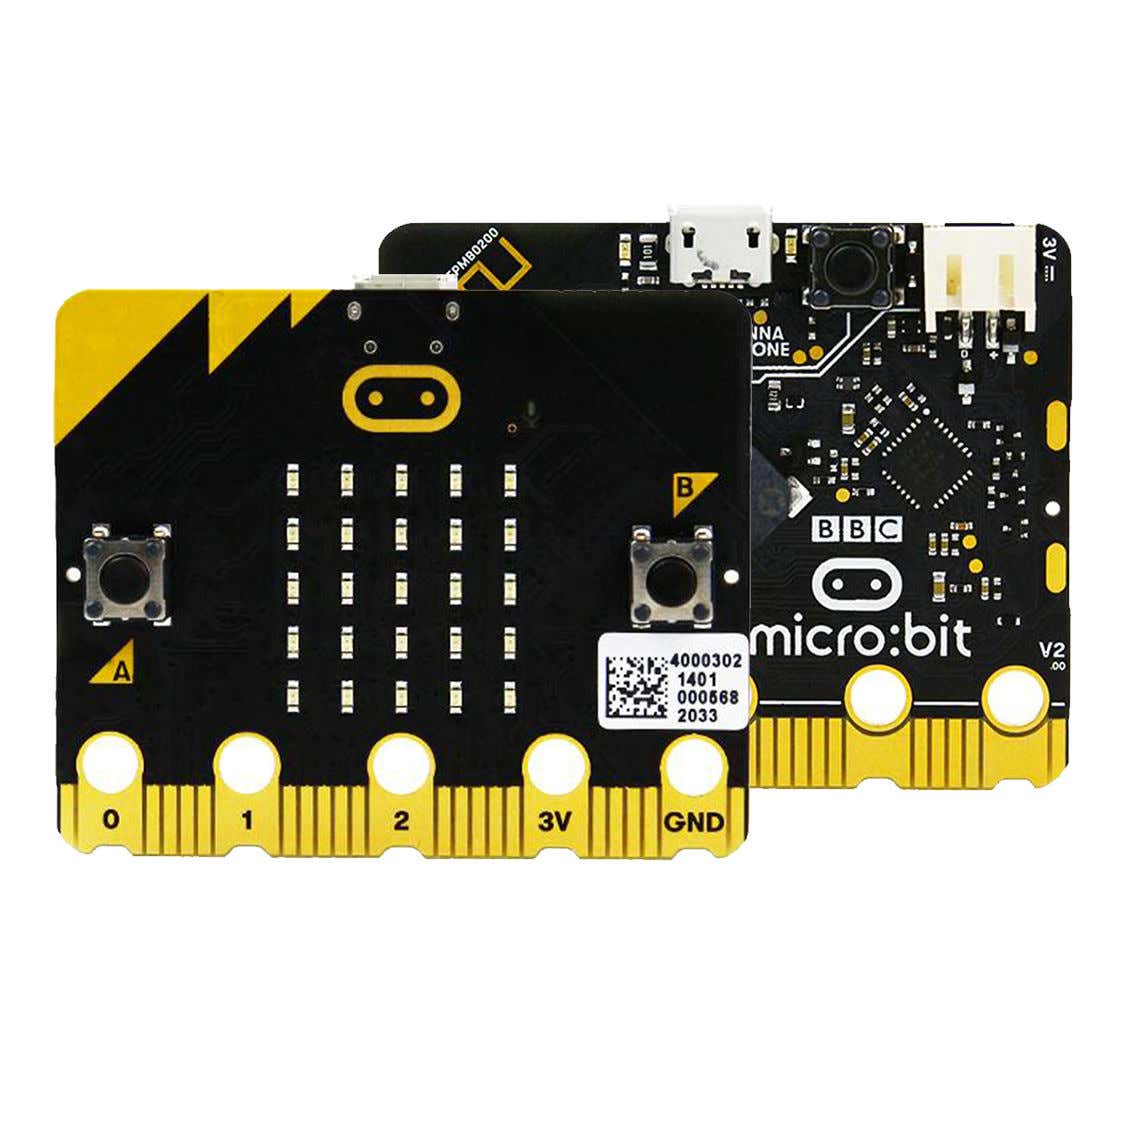 Adventures with the BBC Microbit: Coding with Mu – The steamship